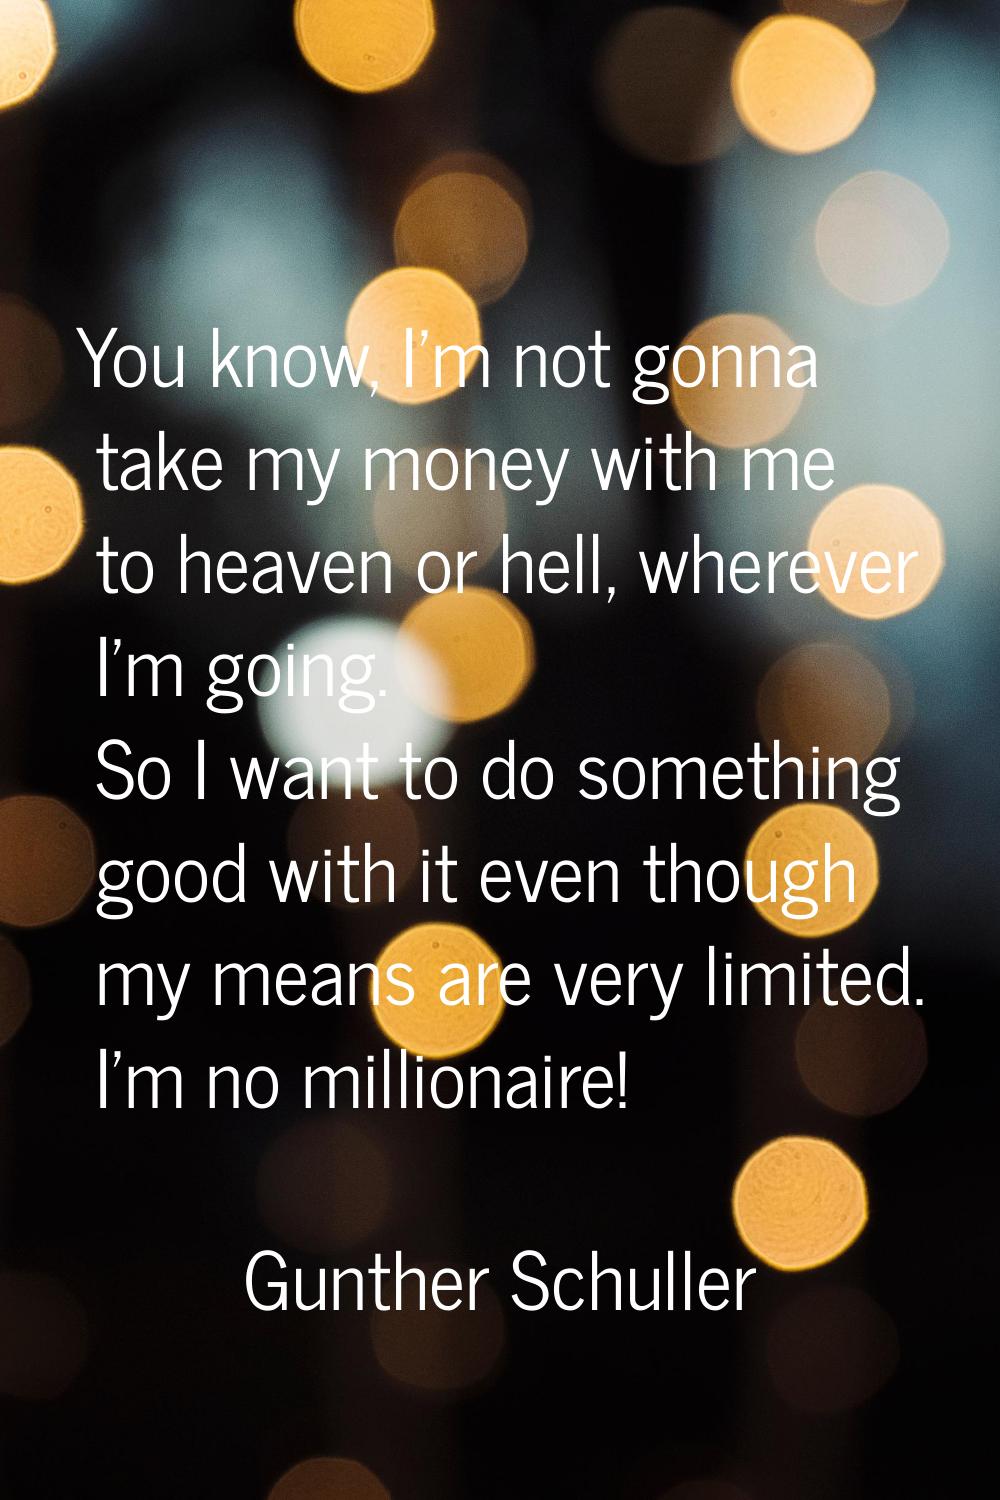 You know, I'm not gonna take my money with me to heaven or hell, wherever I'm going. So I want to d